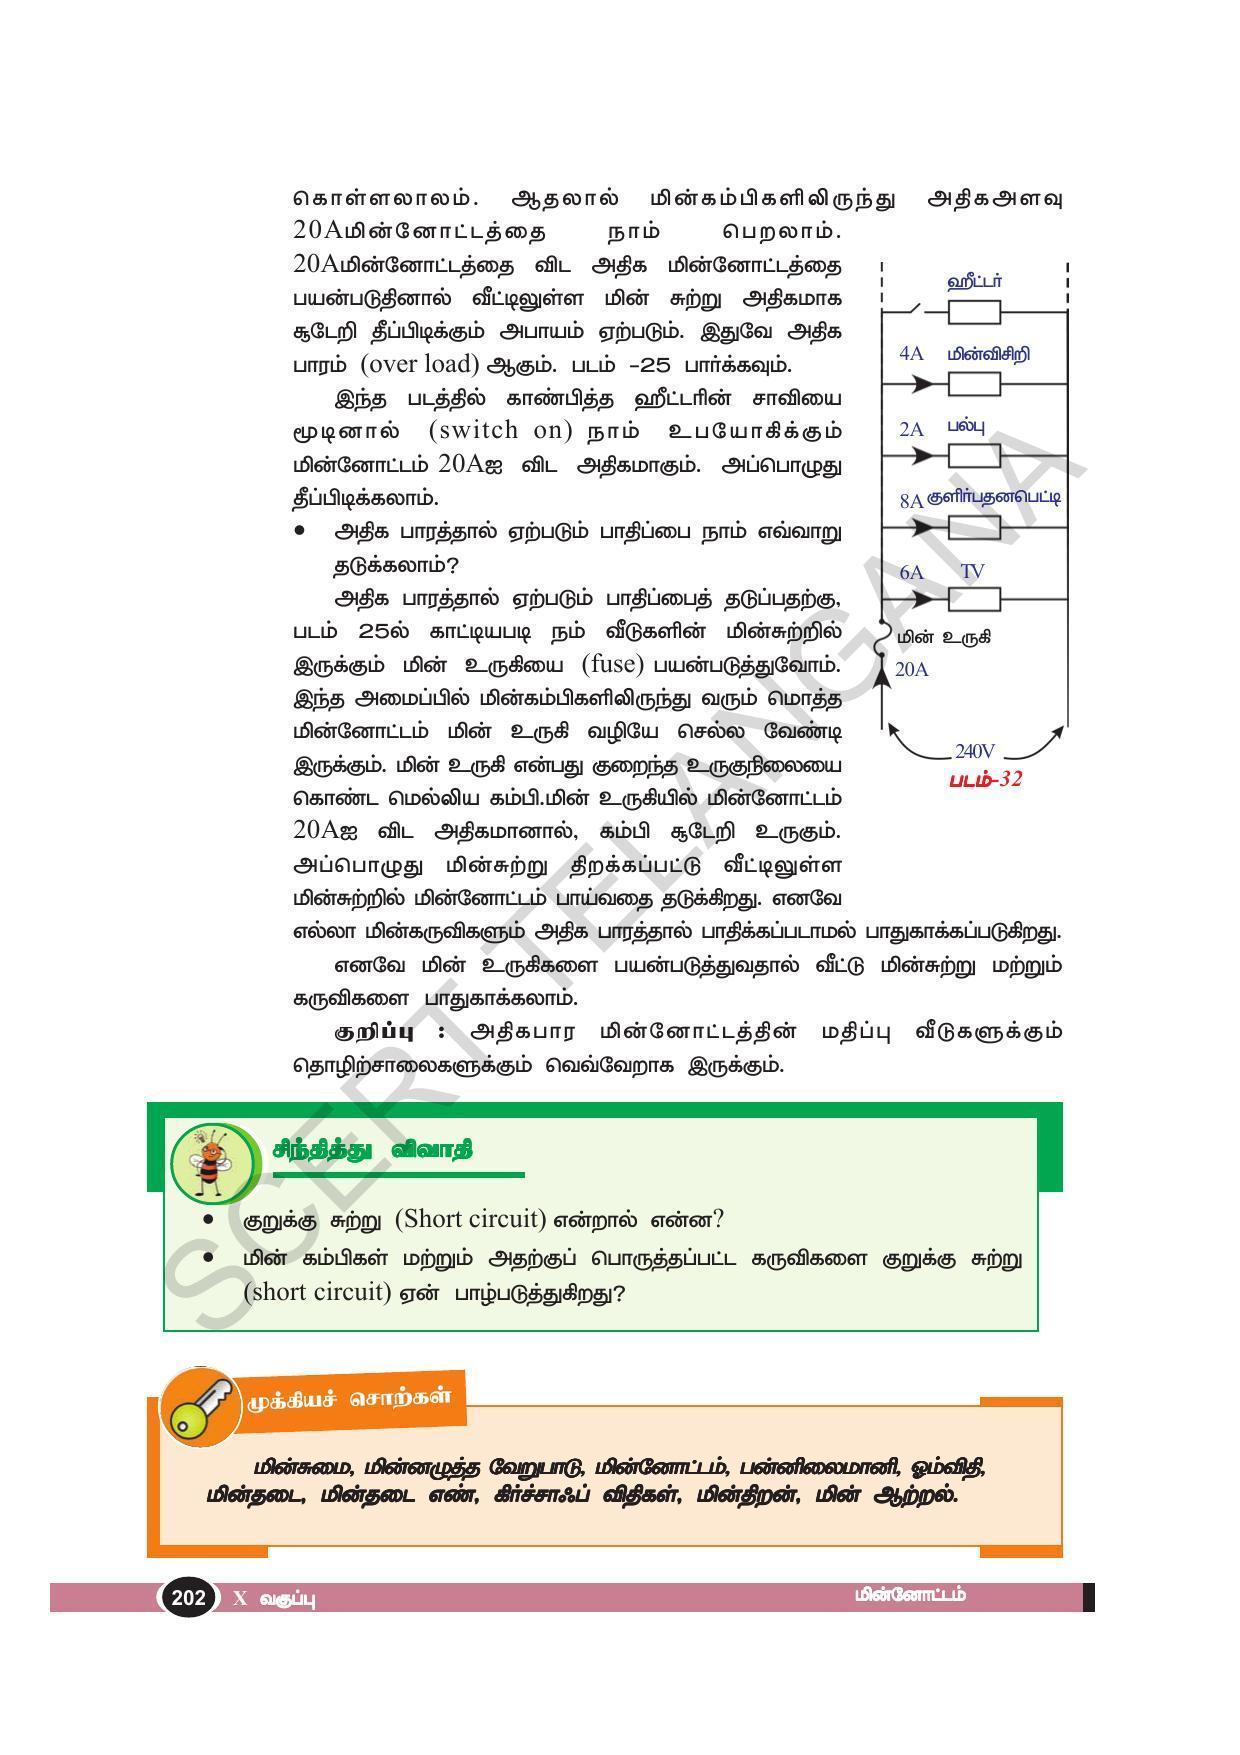 TS SCERT Class 10 Physical Science(Tamil Medium) Text Book - Page 214